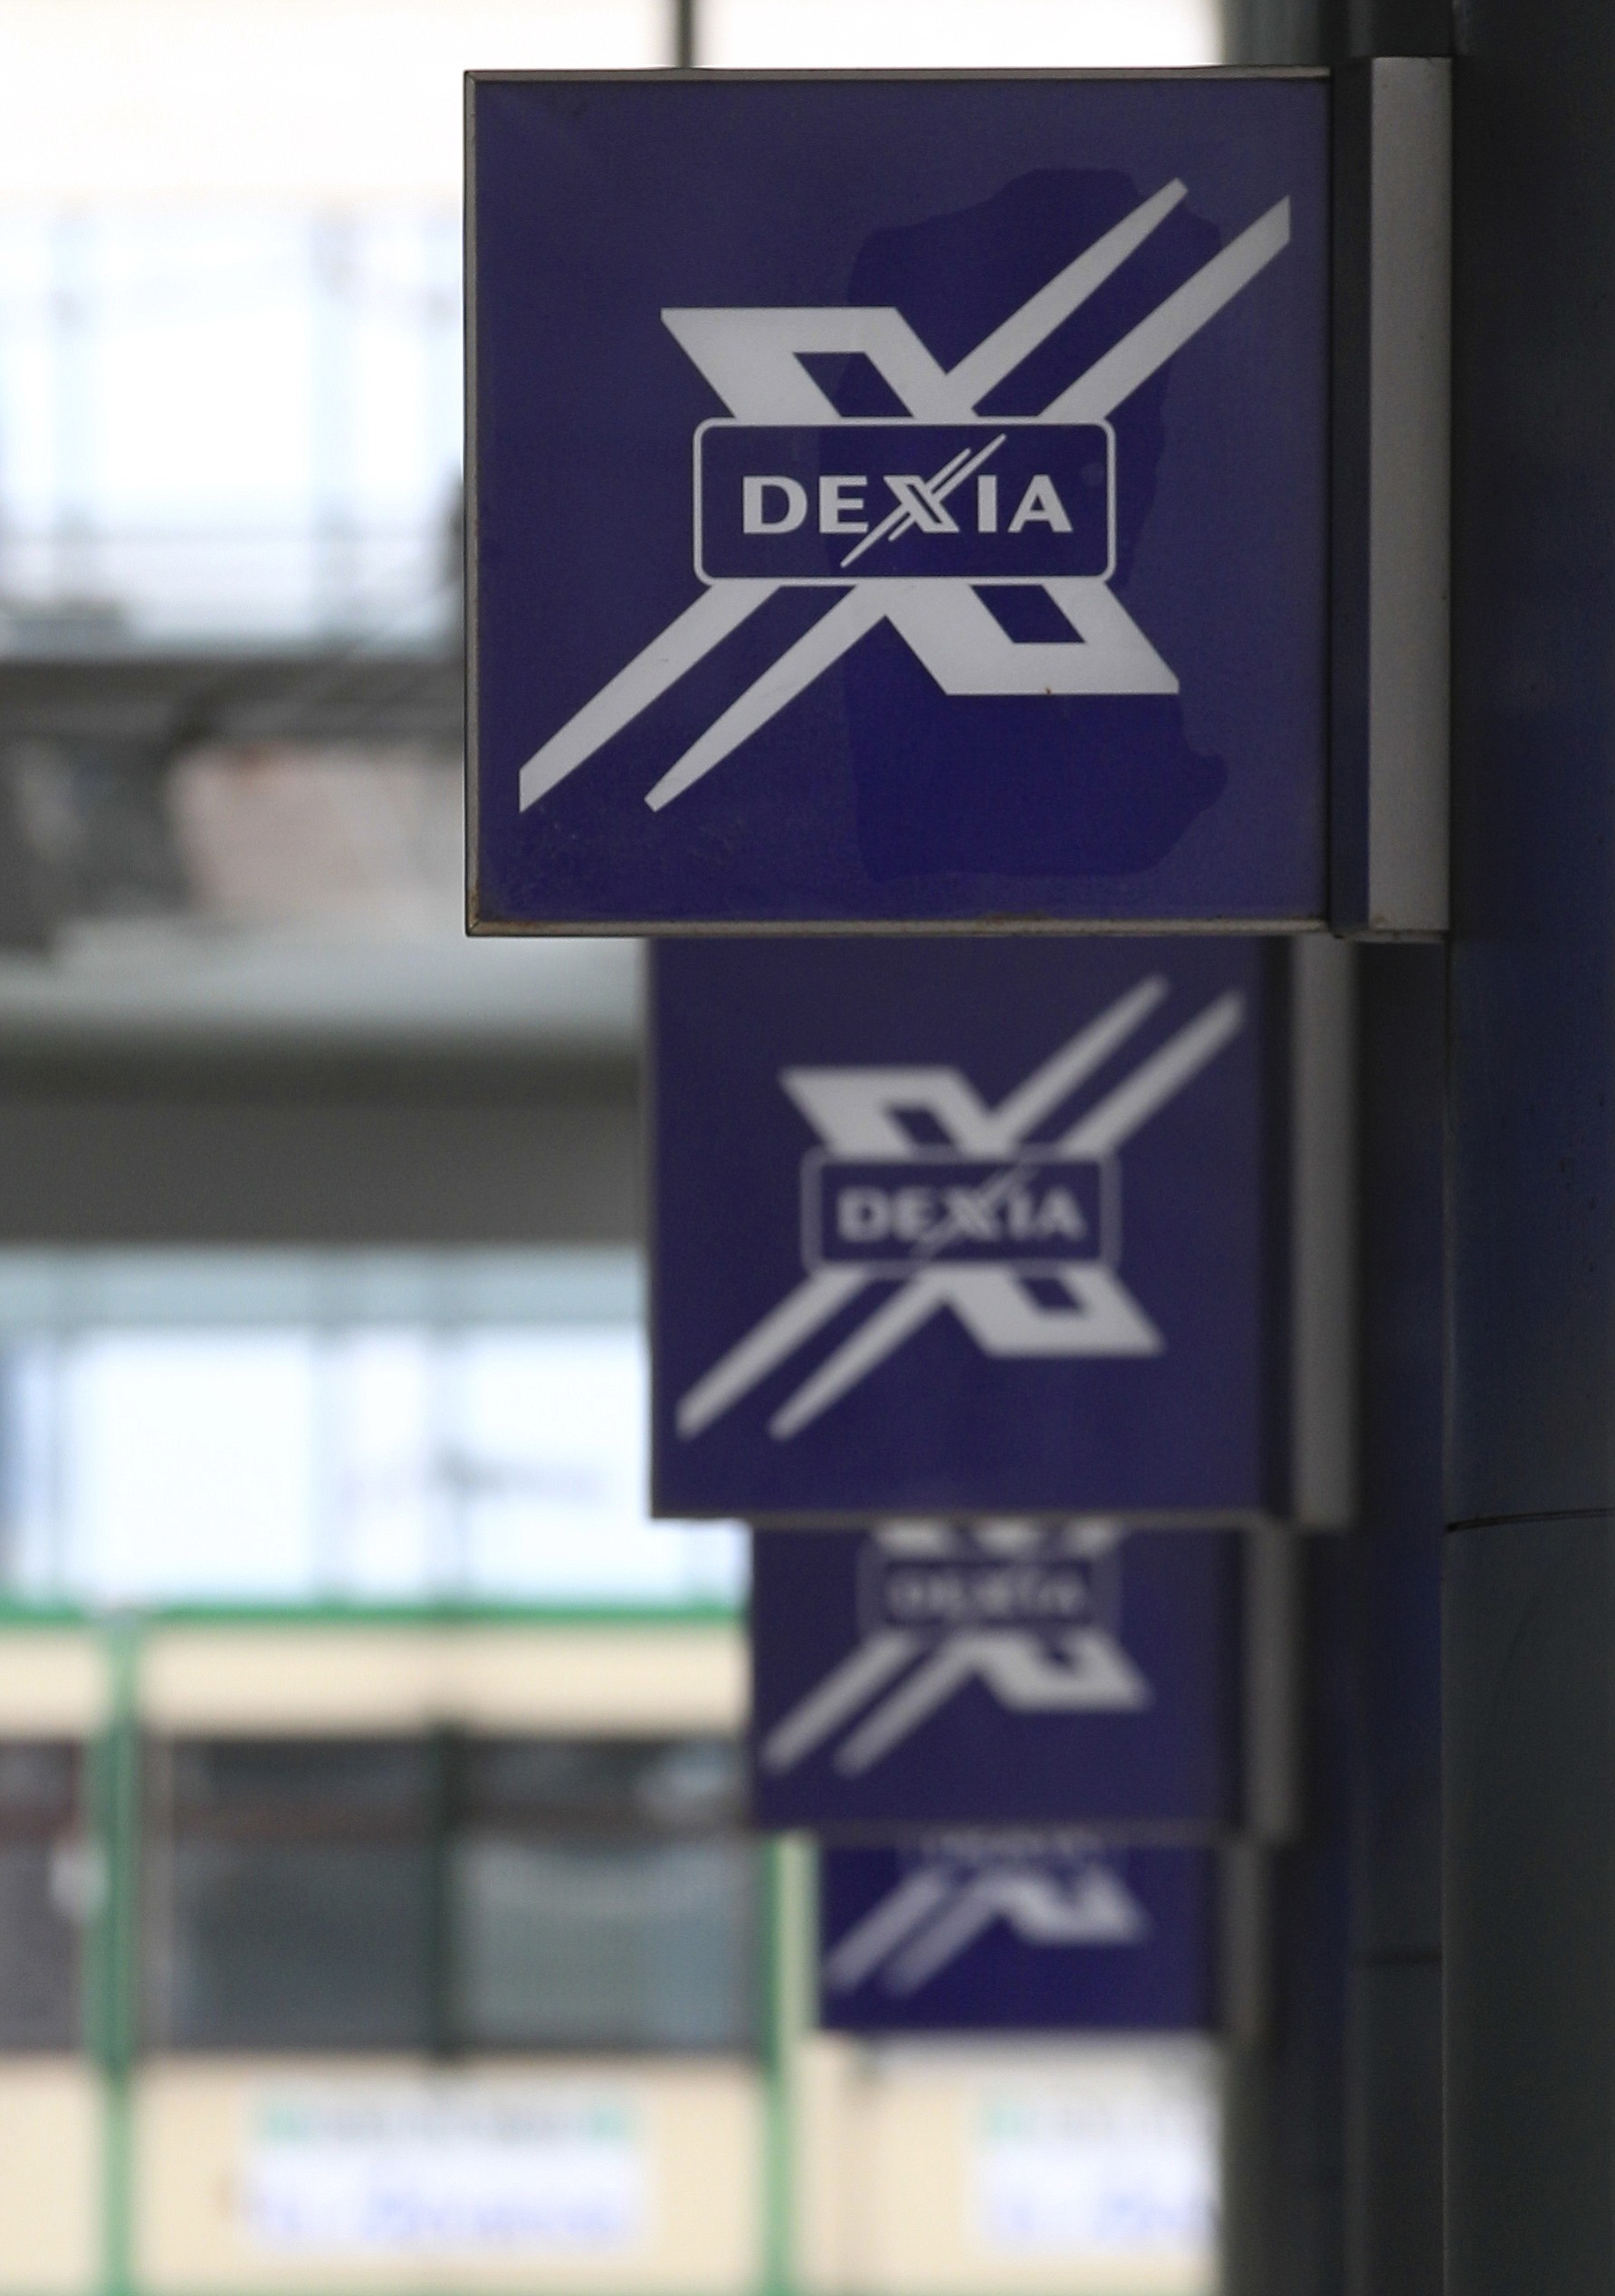 The French-Belgian bank Dexia is one of 13 of Europe's 130 biggest banks that the European Central Bank says flunked an in-depth review of their finances and need an extra 10 billion euros ($12.5 billion) to cushion themselves against any future crises.